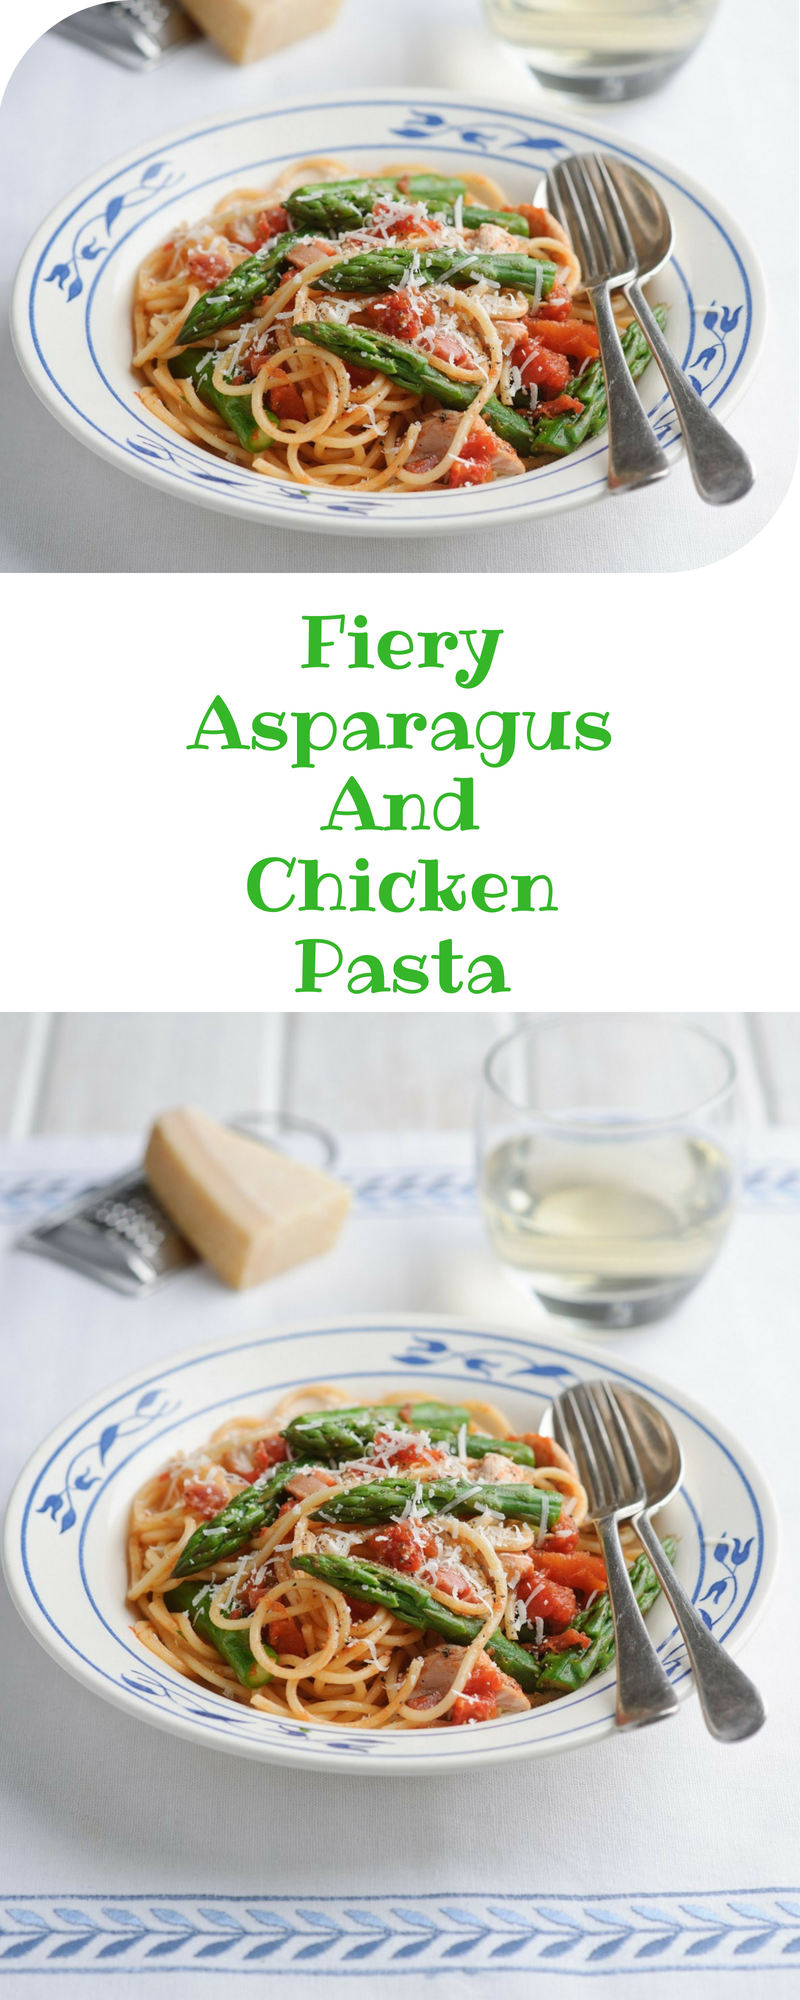 Fiery Asparagus And Chicken Pasta